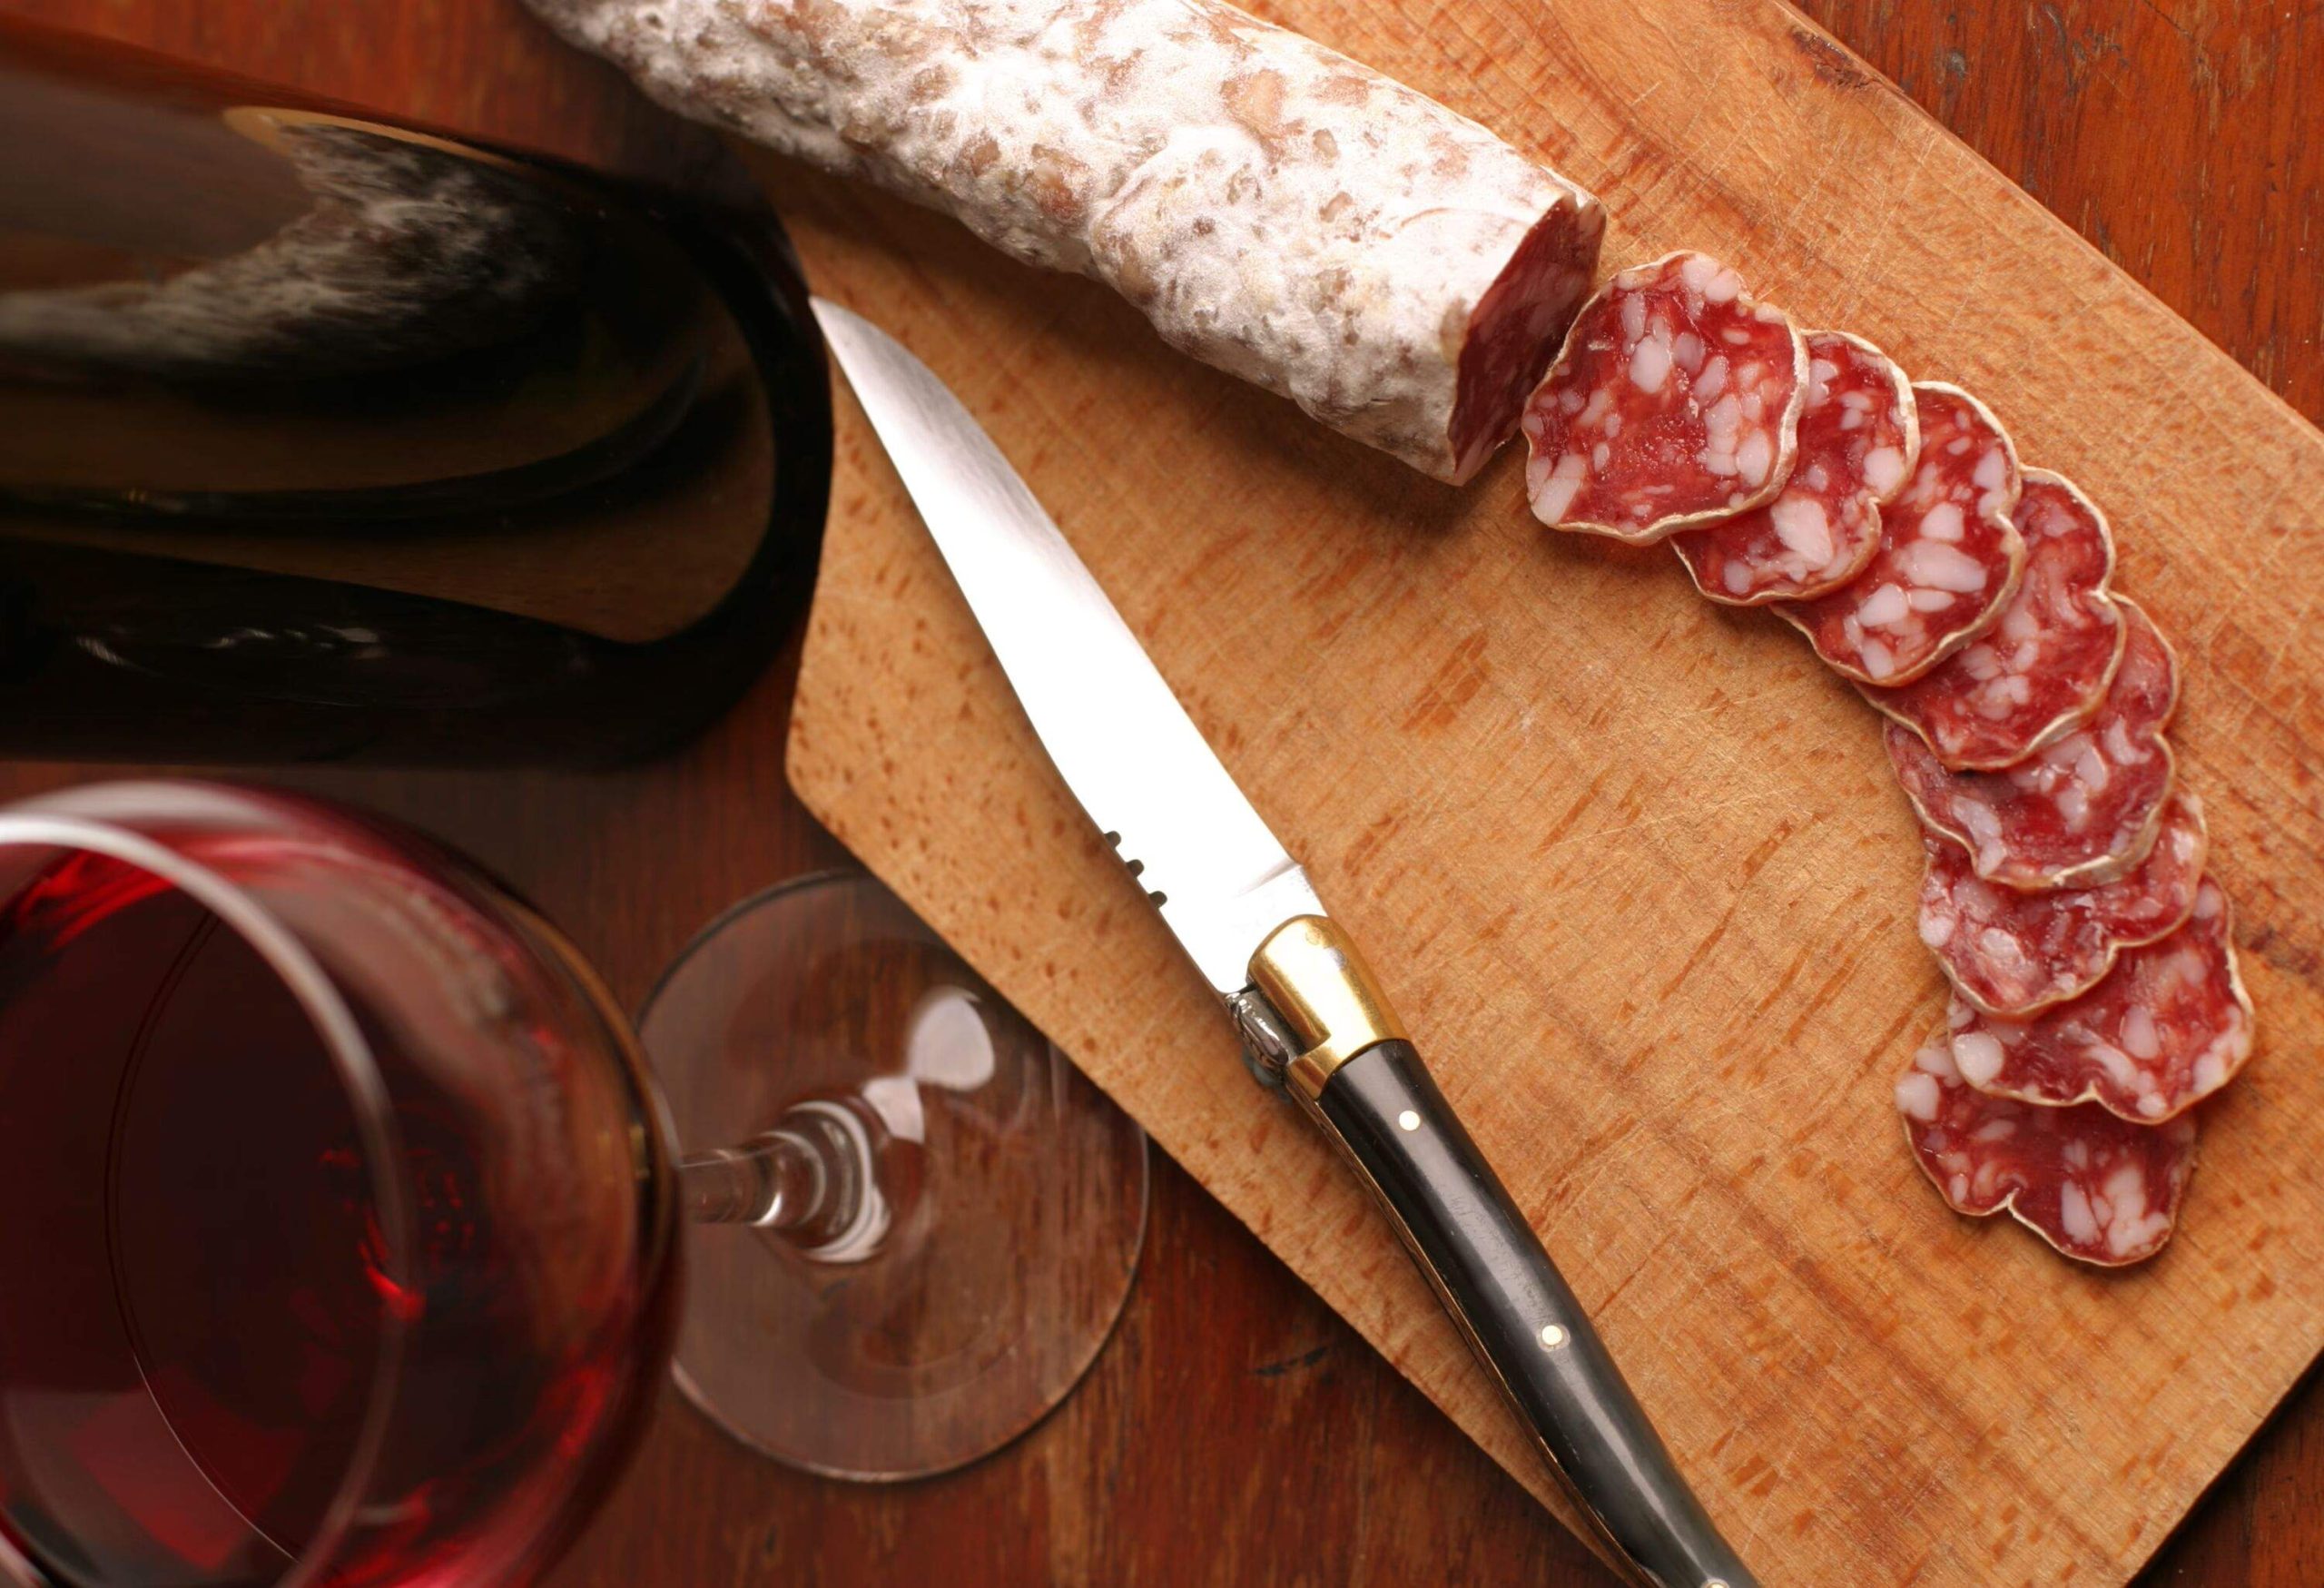 A glass of red wine, a knife and a dry sausage on a chopping board